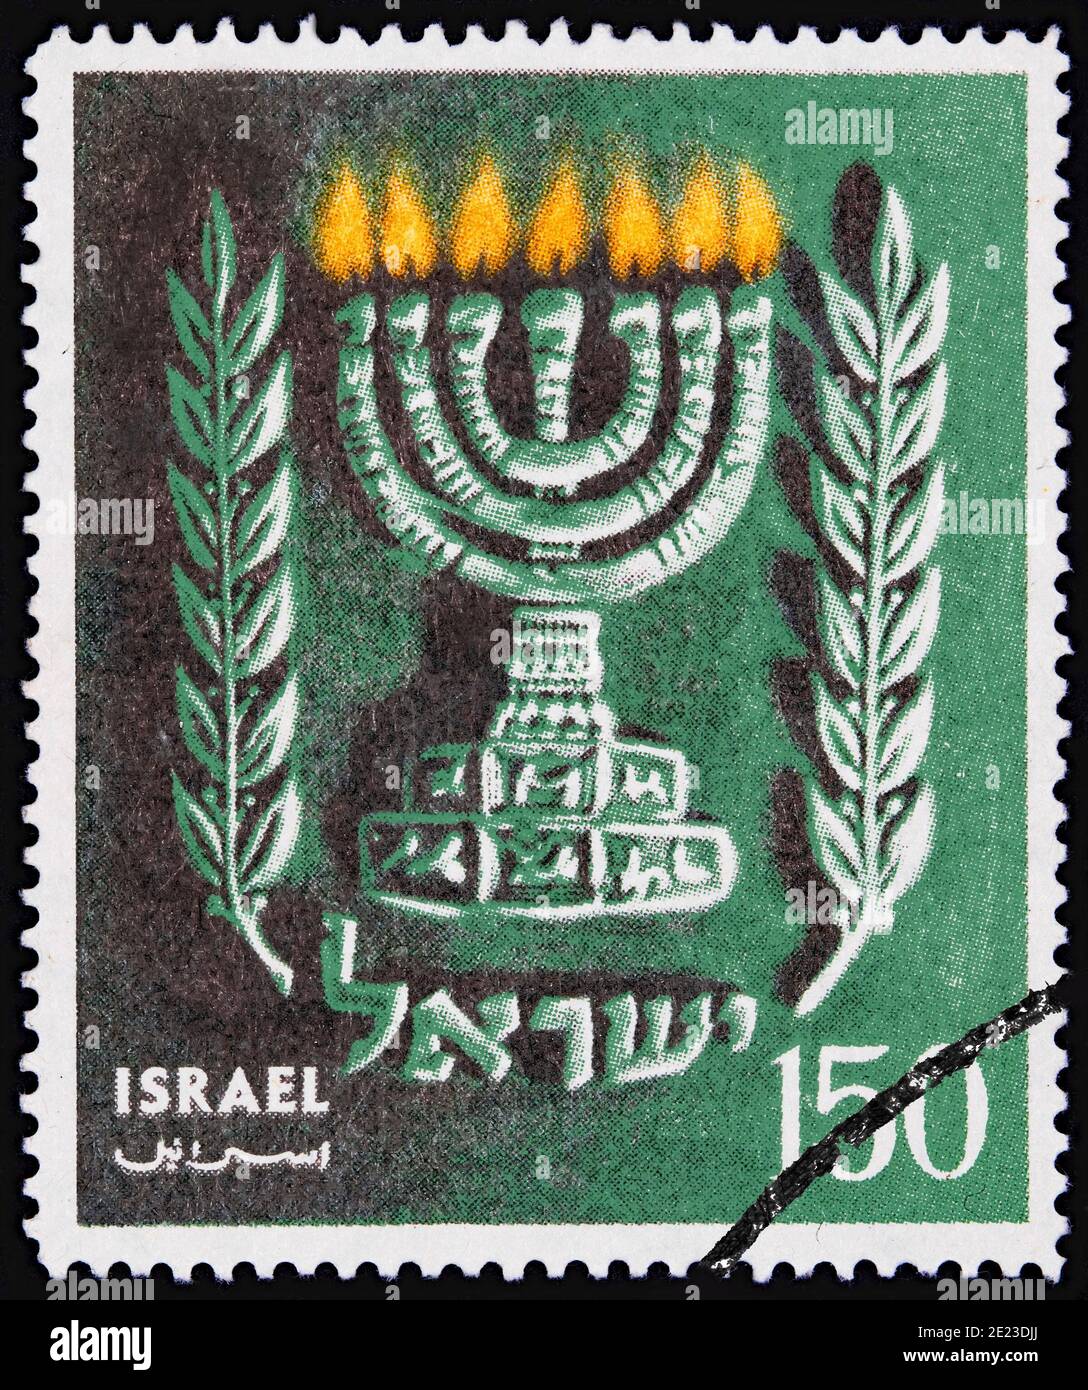 Jerusalem, Israel - April 26, 1955:  Postage stamp with depiction of the ancient temple menorah seen on the Arch of Titus, issued for Remembrance Day. Stock Photo